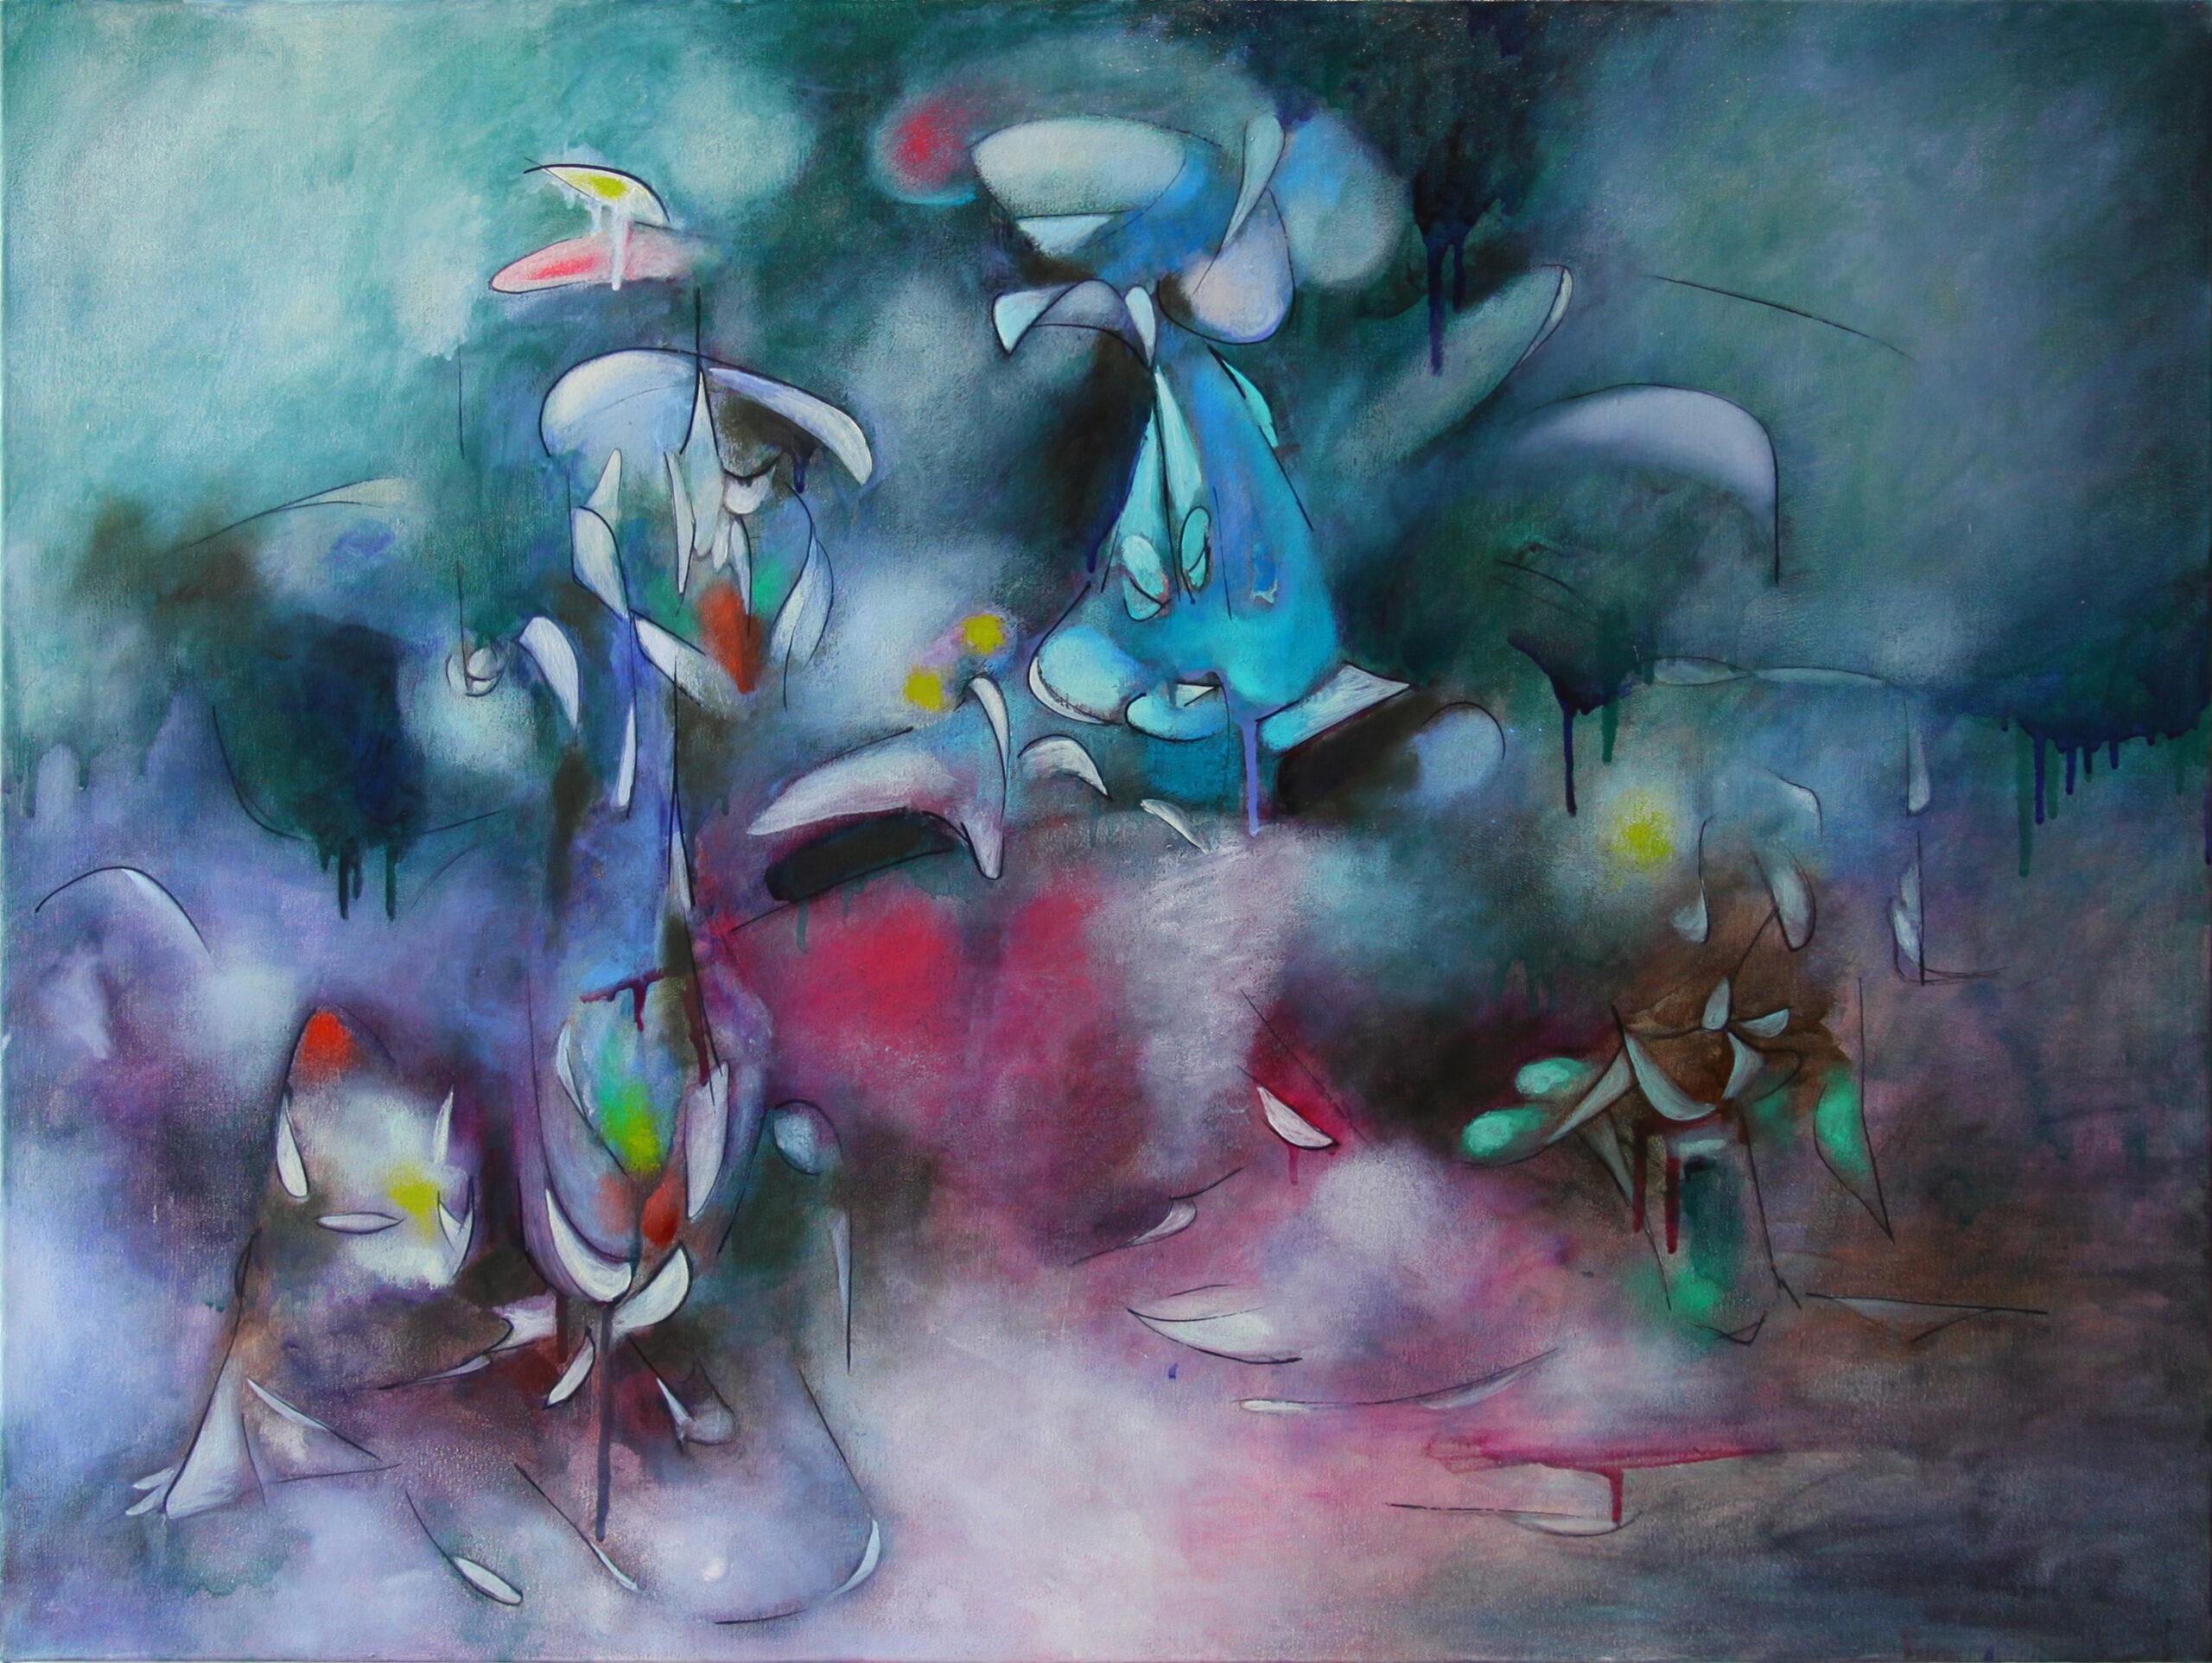 Daniel Ketelhut Abstract Painting - An Abstract Oil on Canvas Painting, "The Dormouse Visits the Hookah Lounge"